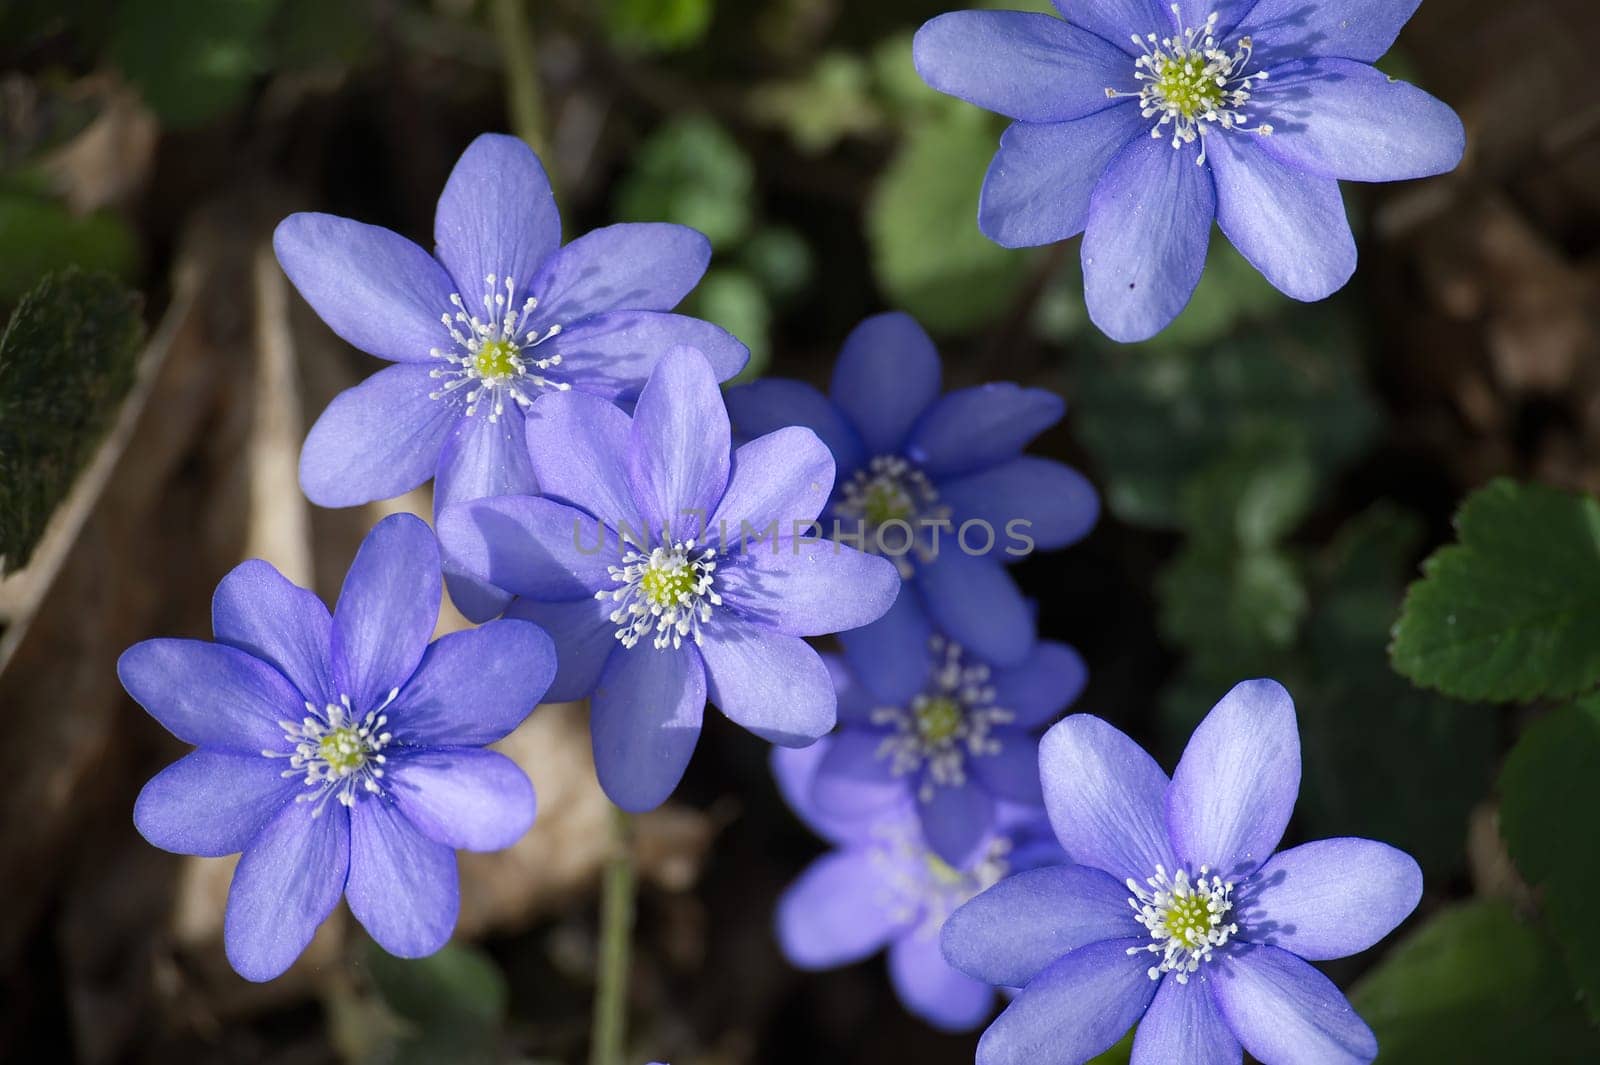 Blue Hepatica flowers and green leaves in close up by NetPix